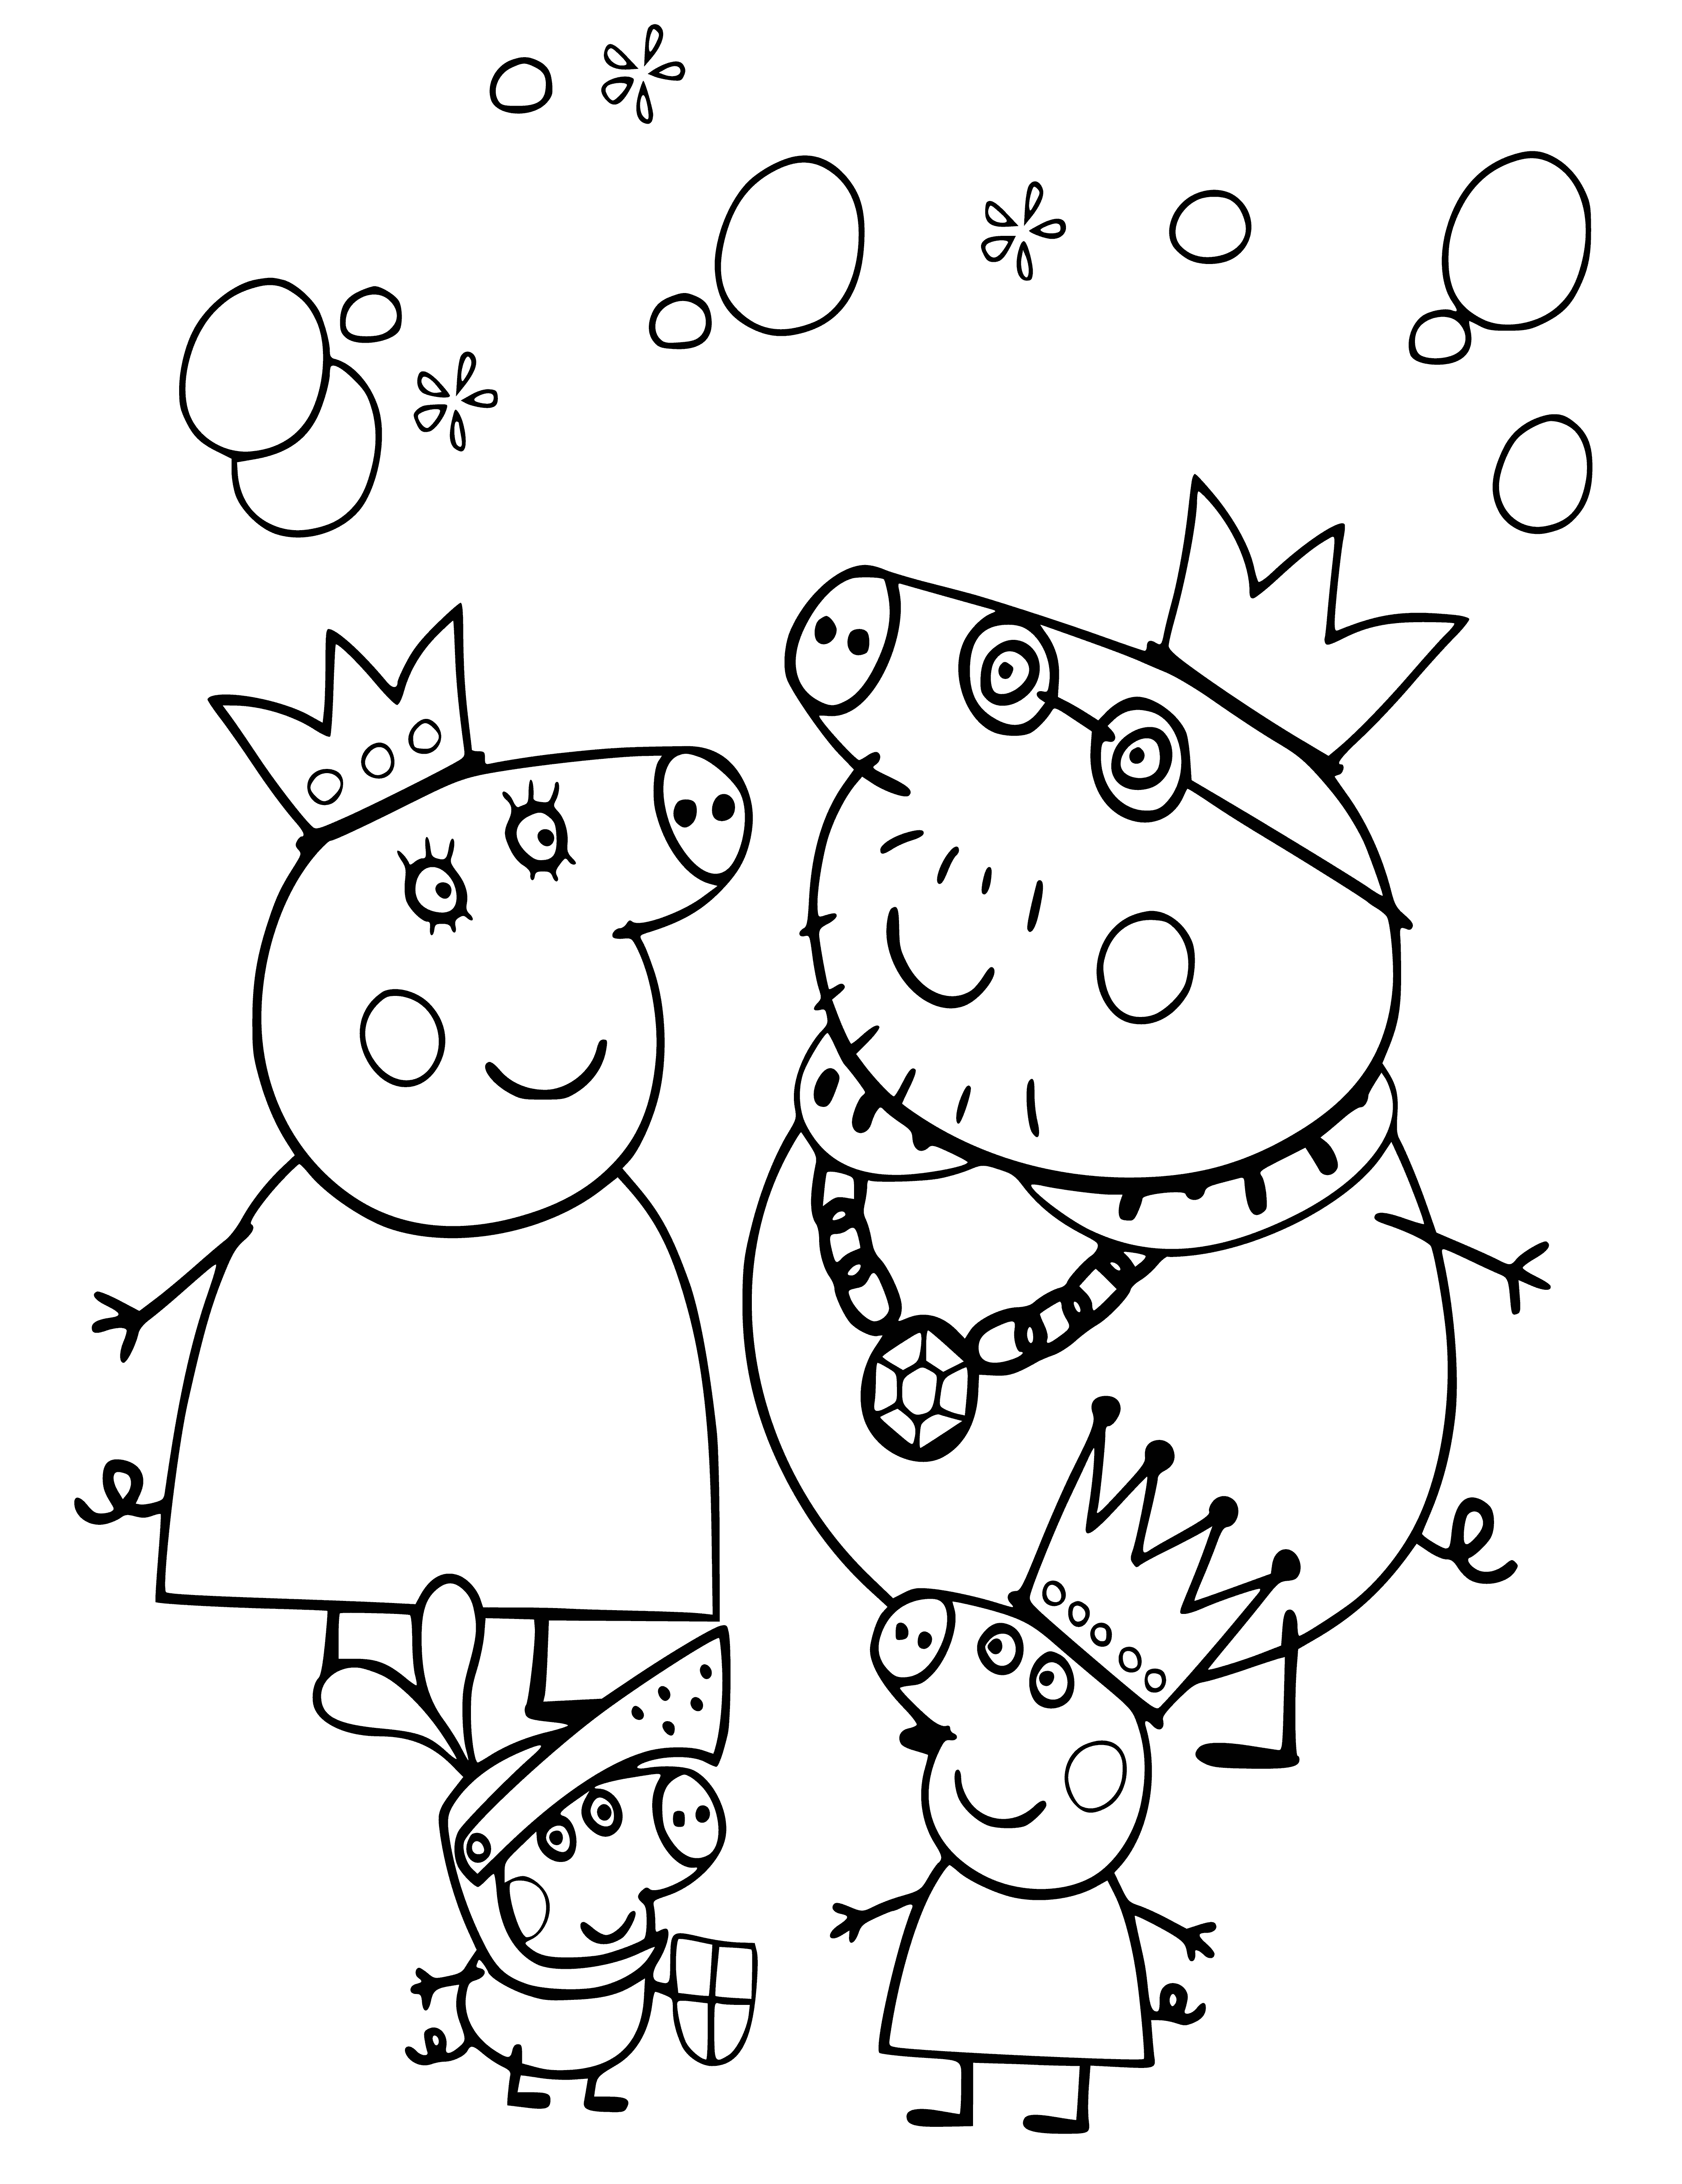 Royal family coloring page